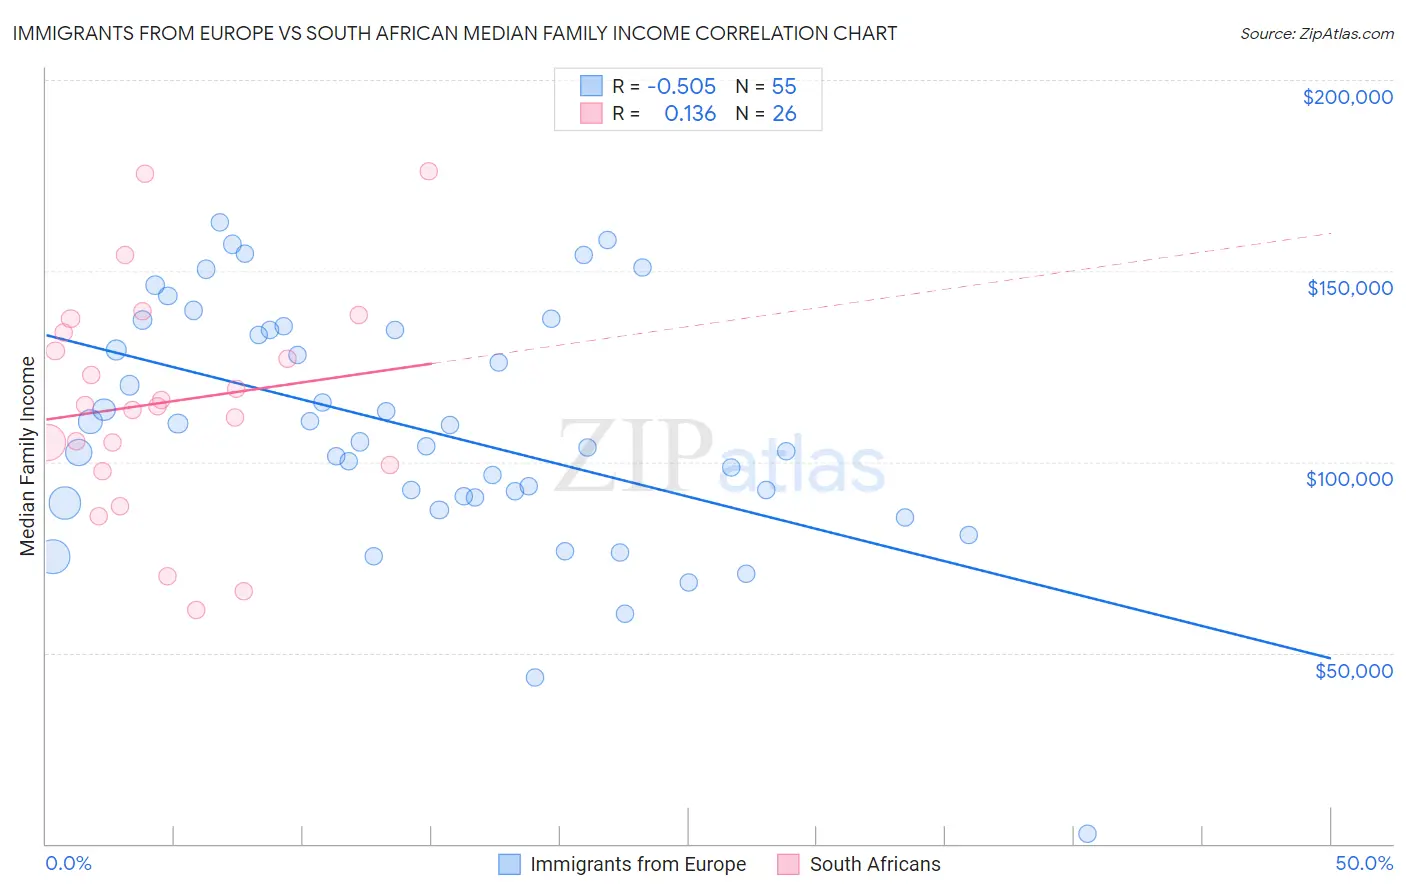 Immigrants from Europe vs South African Median Family Income